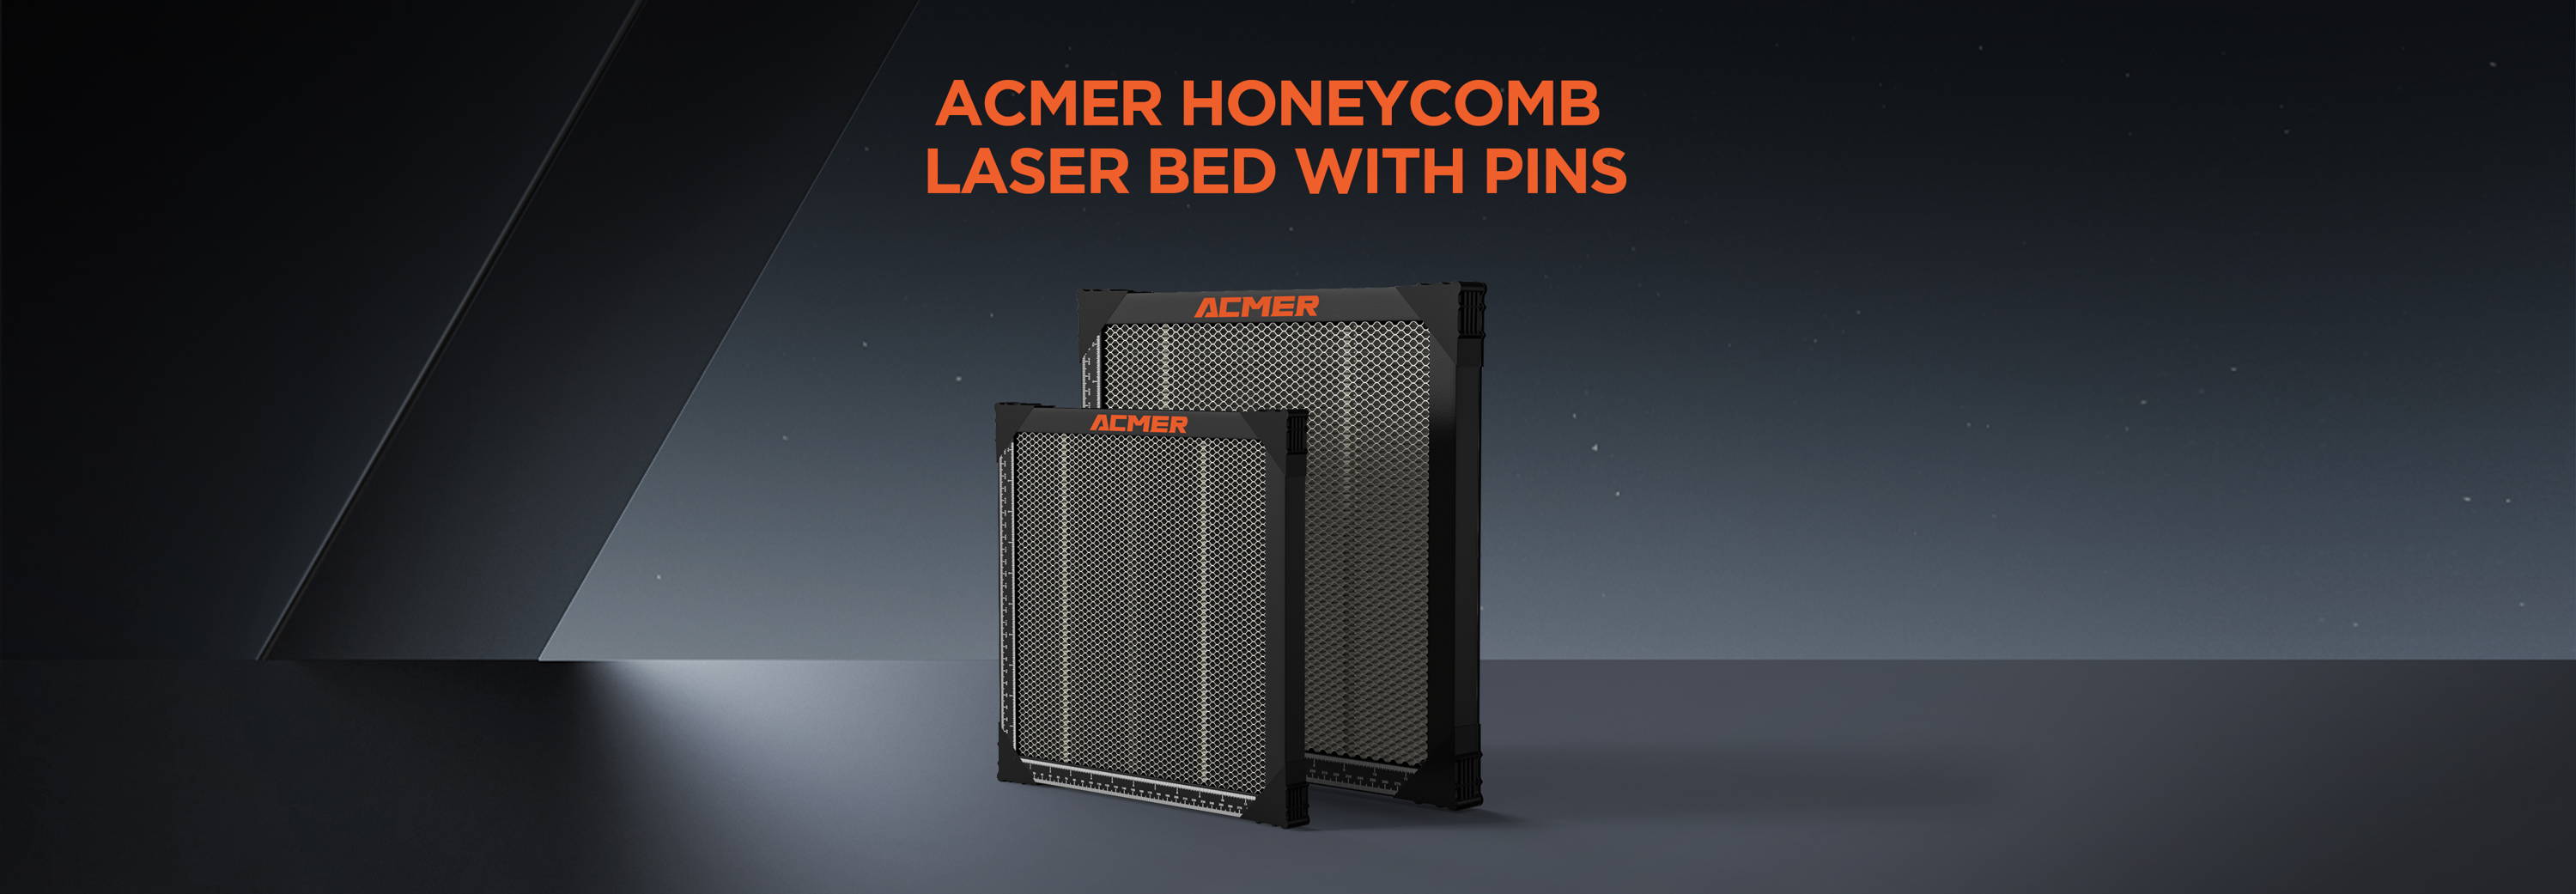 ACMER Honeycomb Laser Bed with Pins